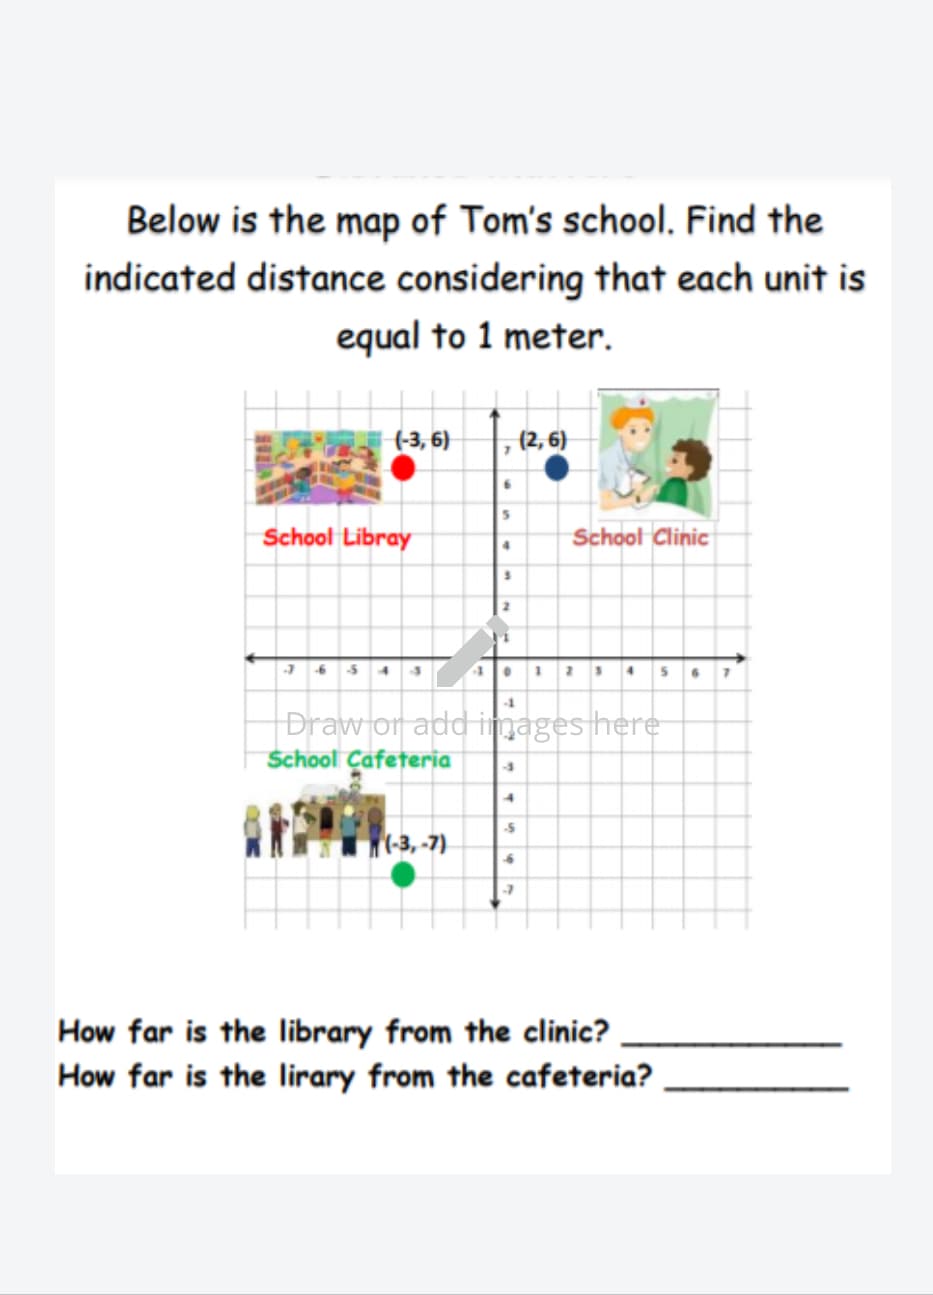 Below is the map of Tom's school. Find the
indicated distance considering that each unit is
equal to 1 meter.
(-3, 6)
(2, 6)
School Libray
School Clinic
2
1 6 5 43
1 1 2 4
Draw or add images here
School Cafeteria
(-3, -7)
How far is the library from the clinic?
How far is the lirary from the cafeteria?
